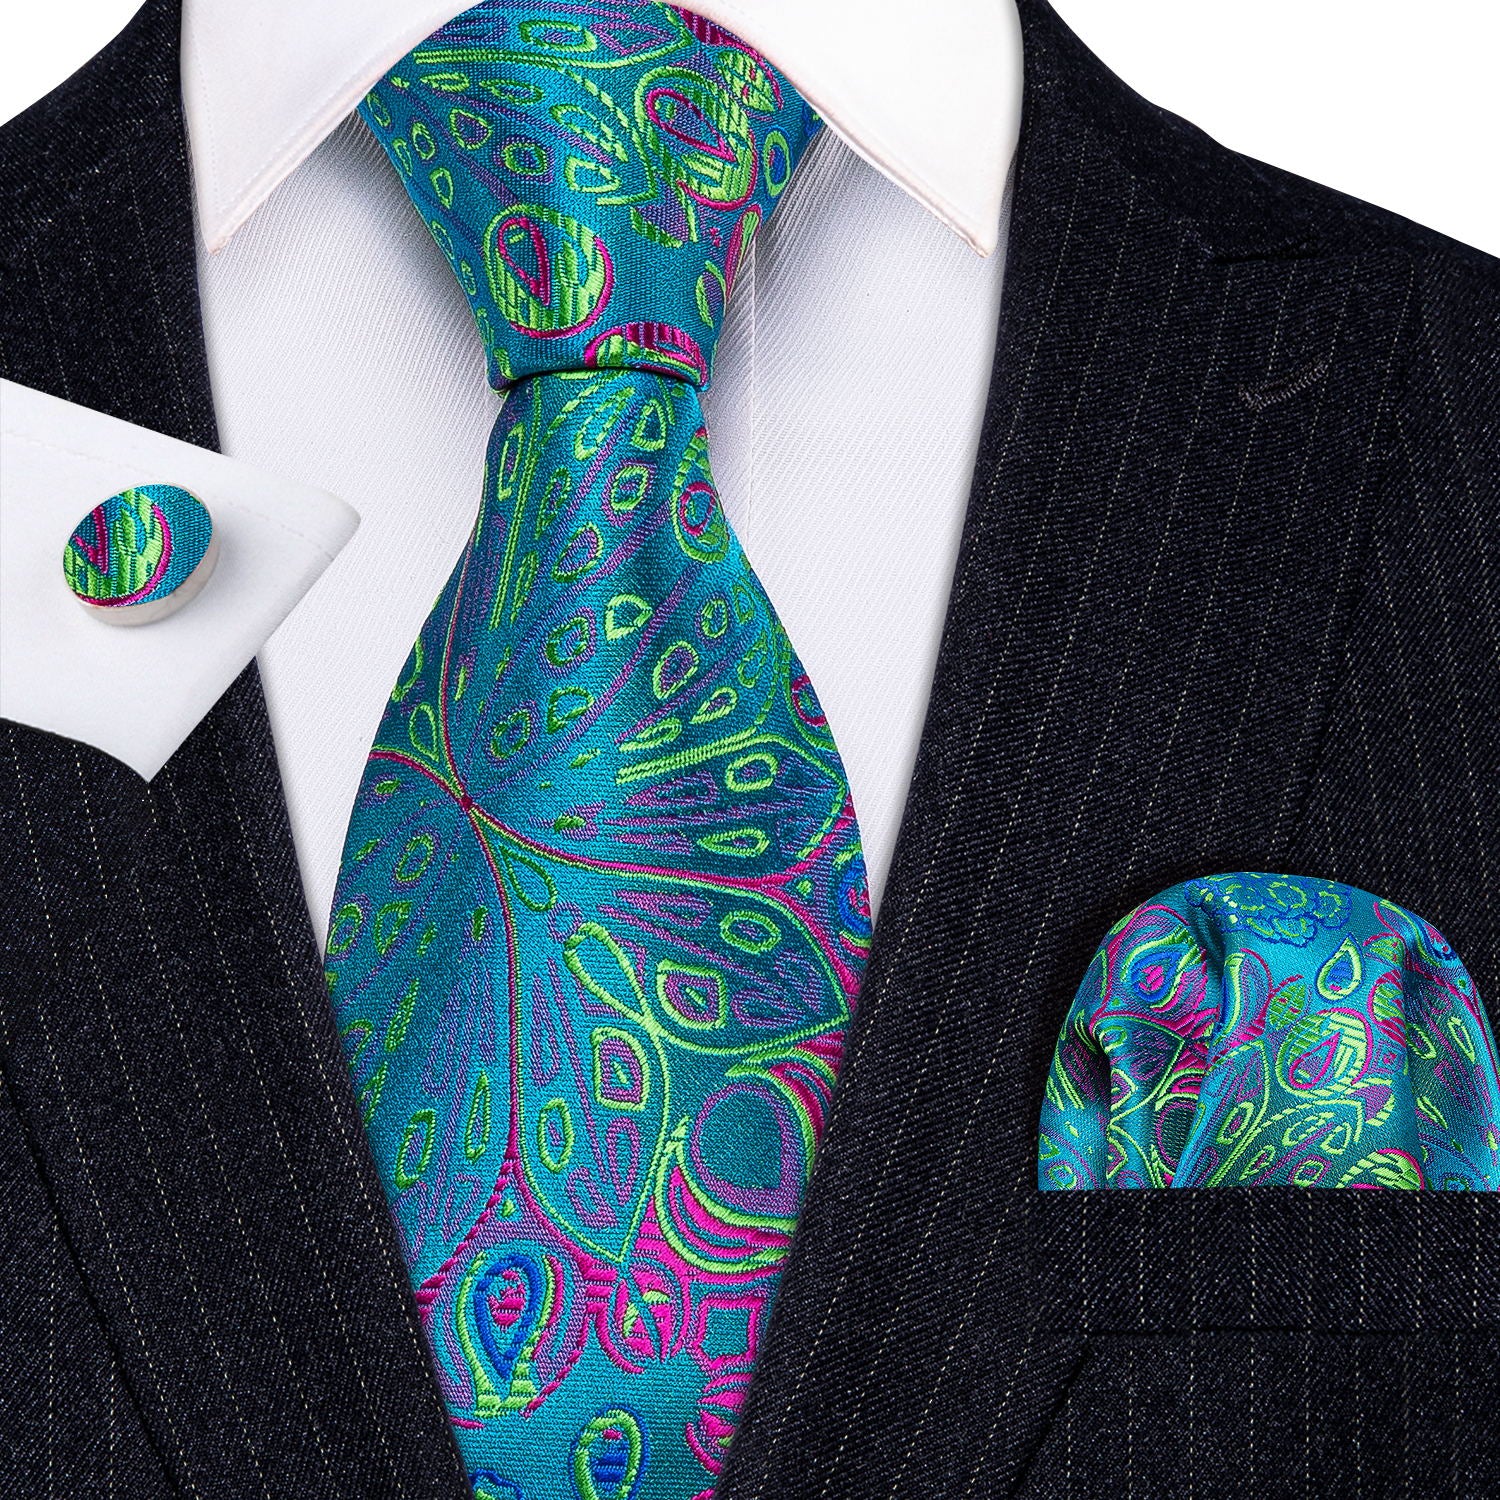 Barry.wang Blue Tie Green Floral Tie Pocket Square Cufflinks Set